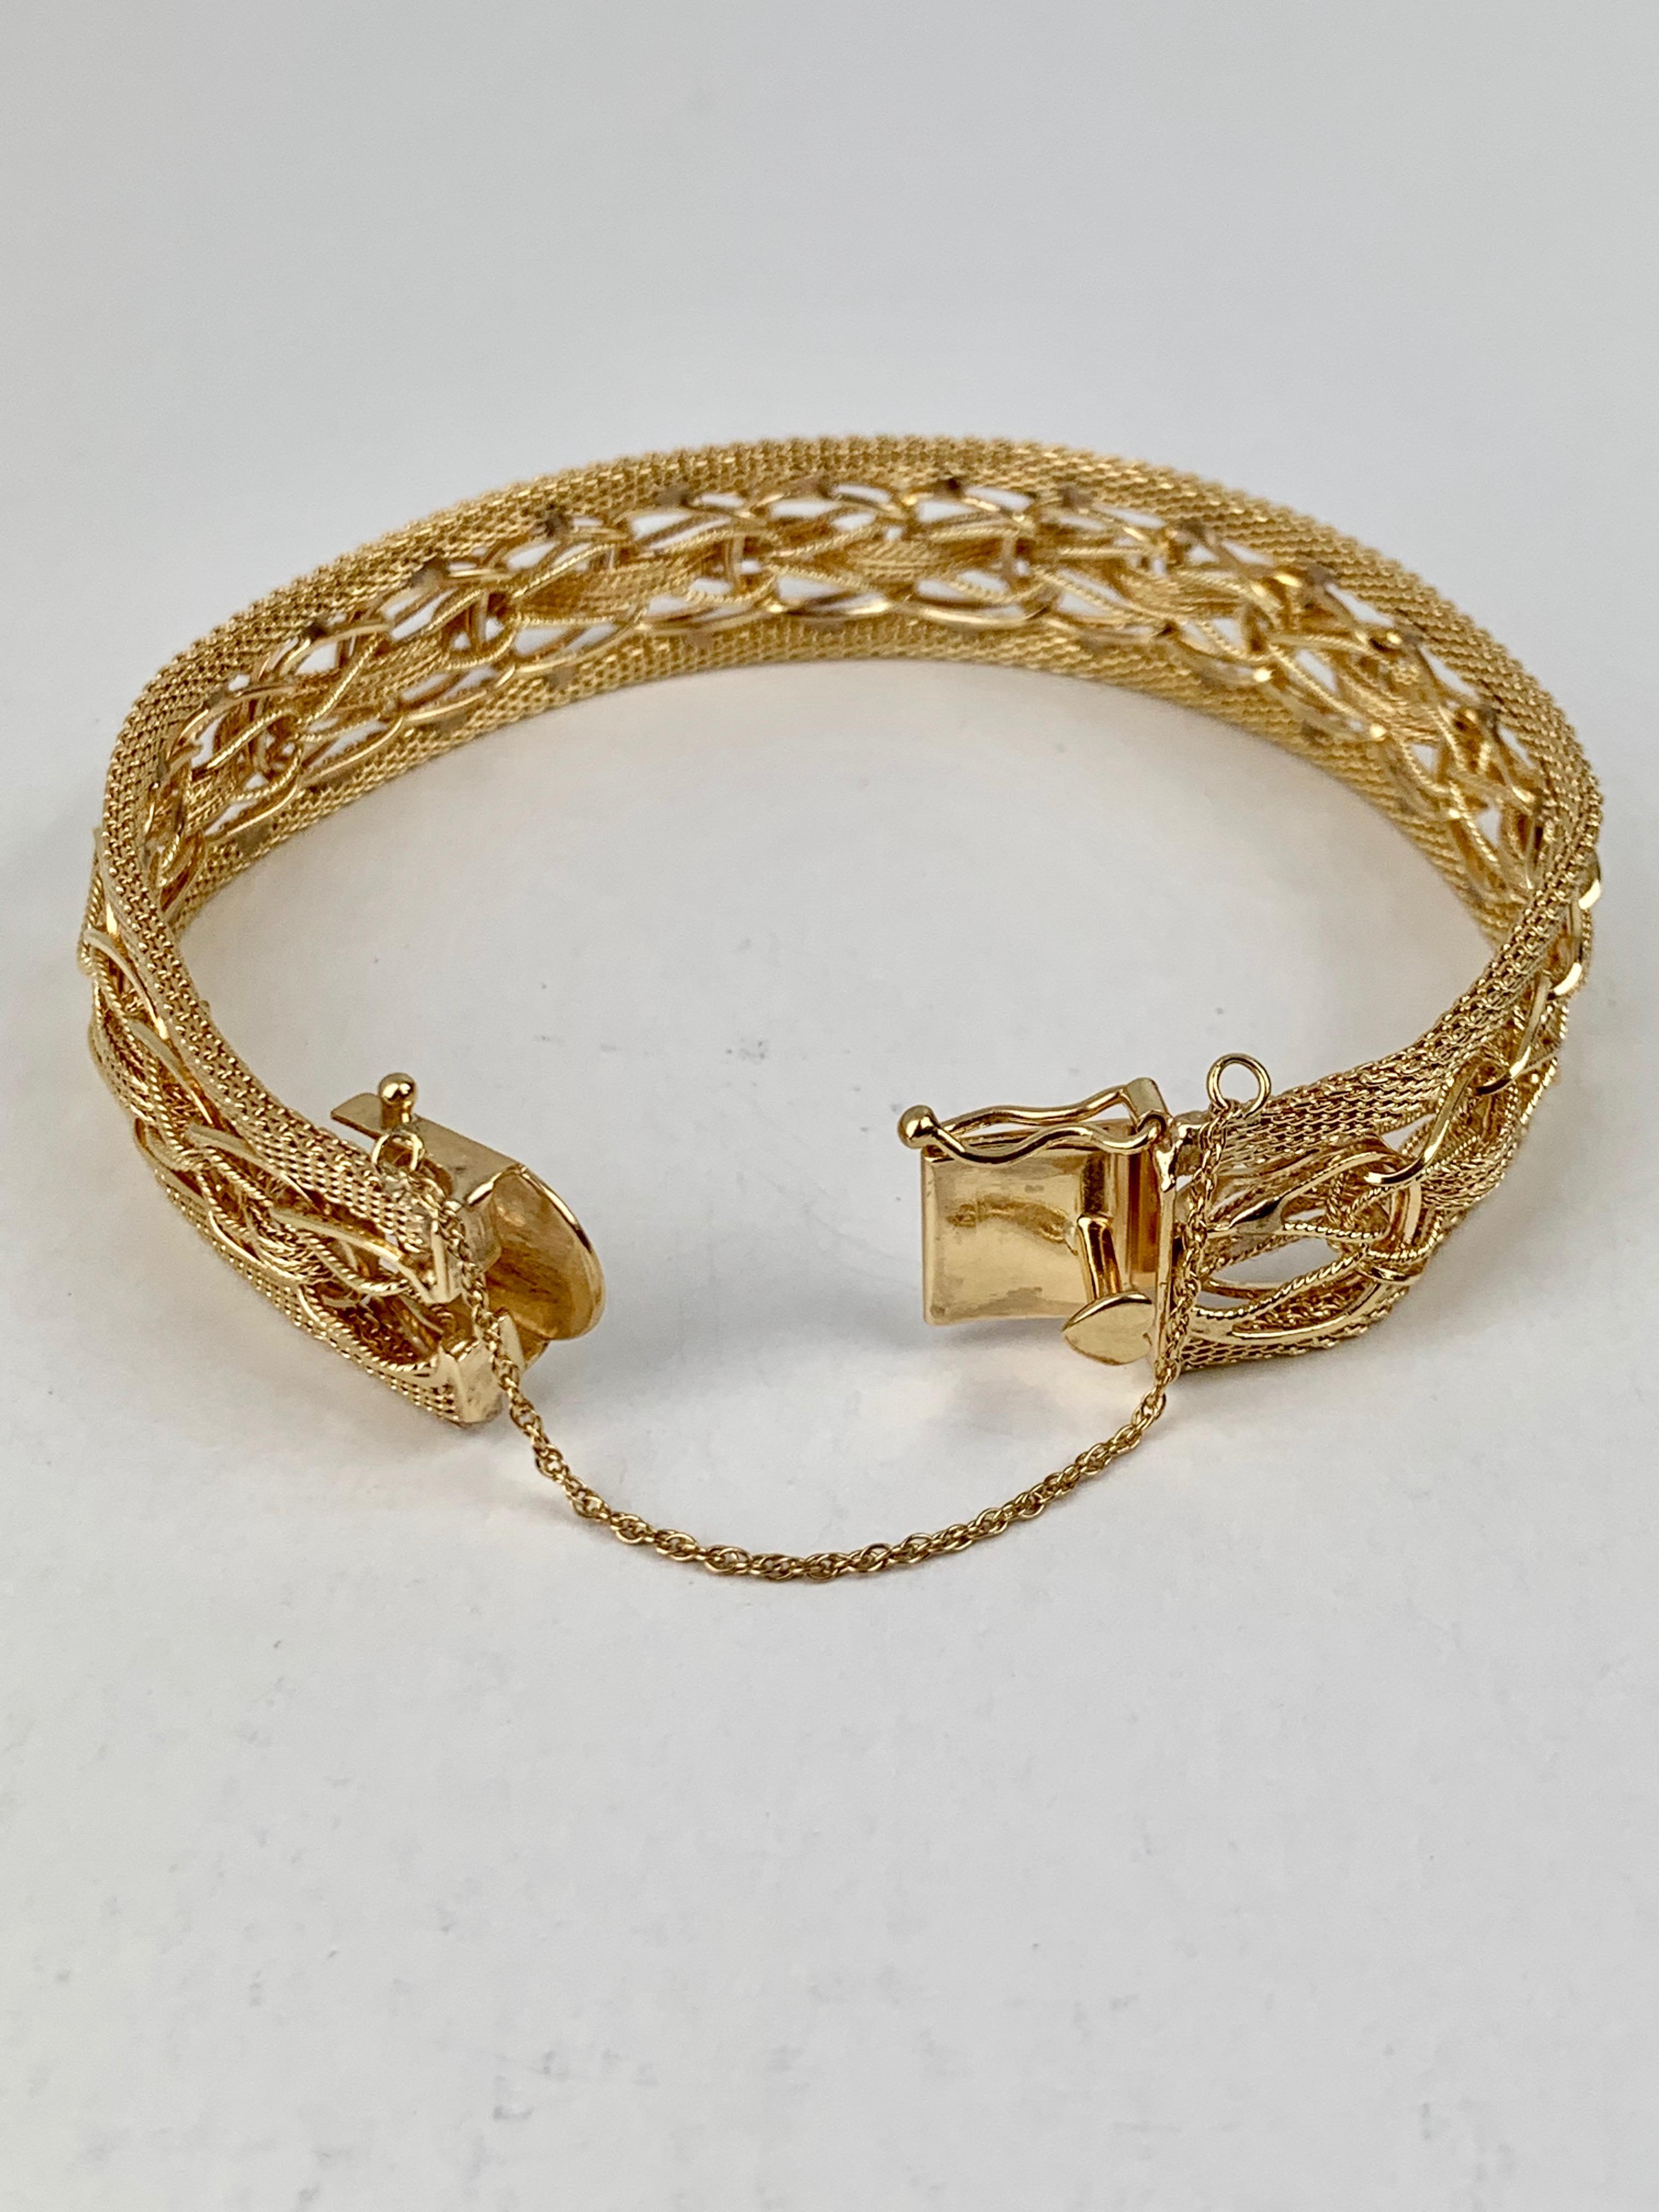 Solid 14 karat yellow gold mesh bracelet with heart shaped thumb catch plus a figure eight catch and safety chain on the side for safety. The mesh is quite interesting and partially hand woven. The bracelet is clearly marked 14k on the back of the